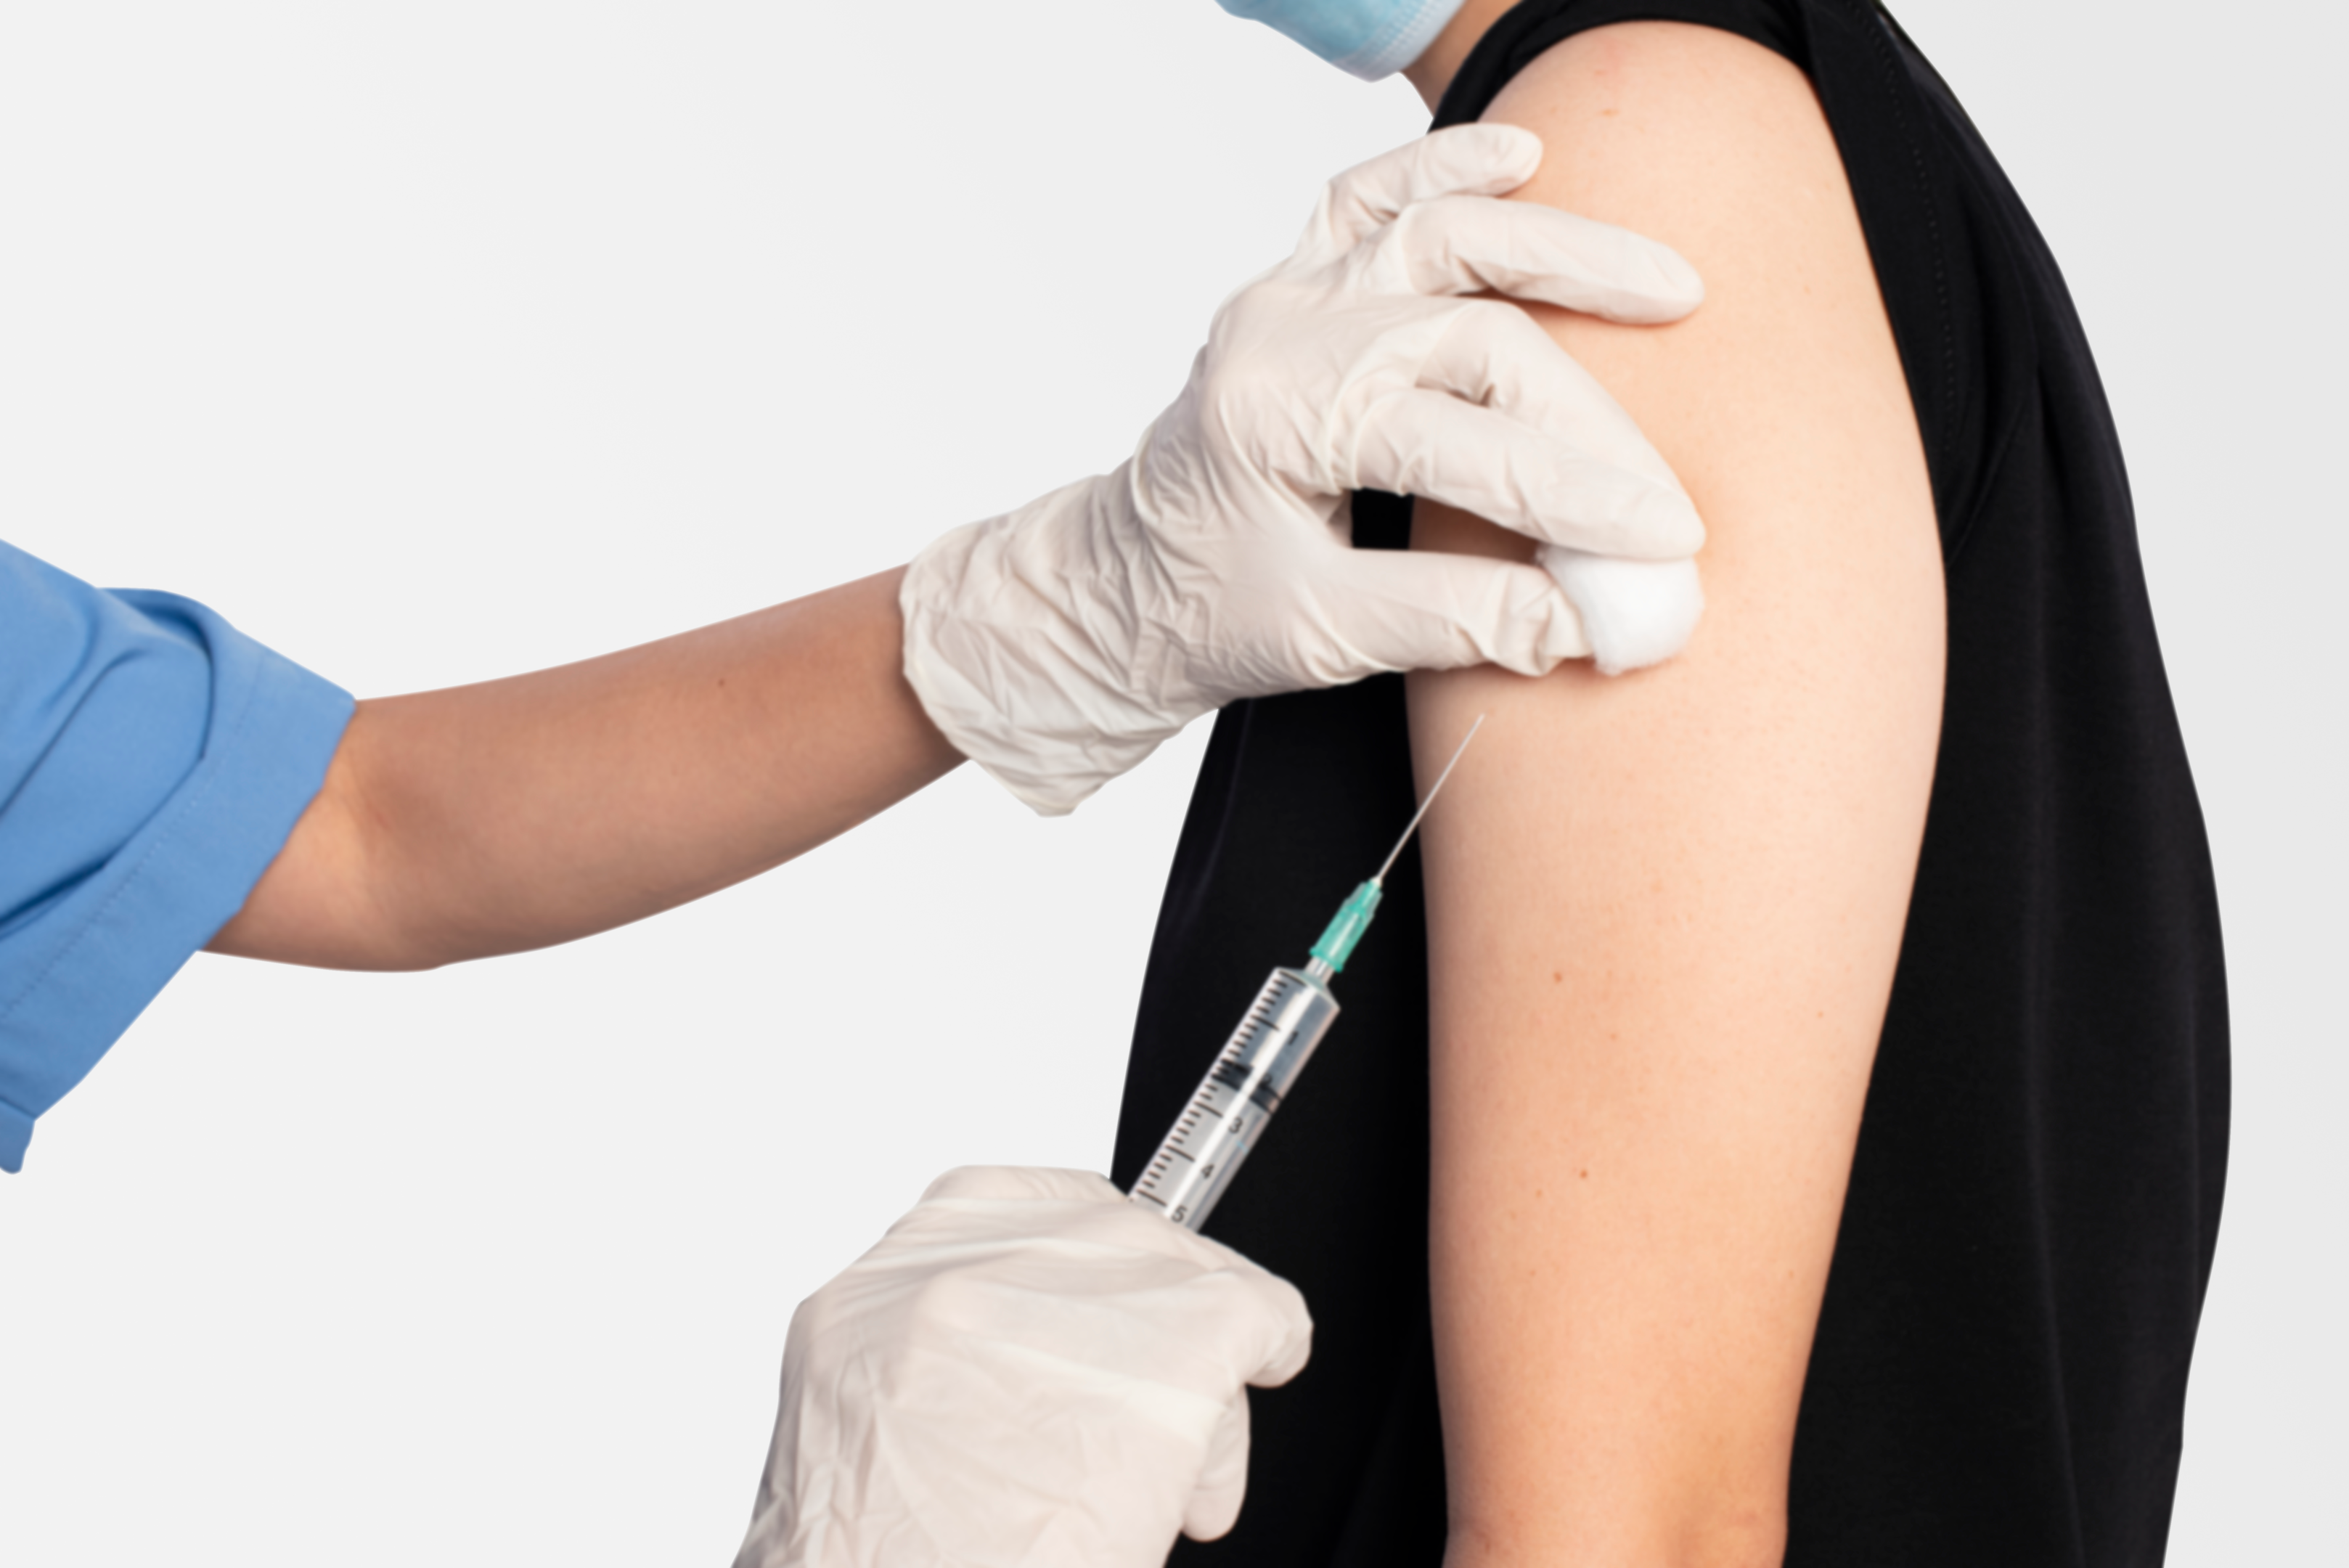 Proper vaccination reduces the risk of severe infection.